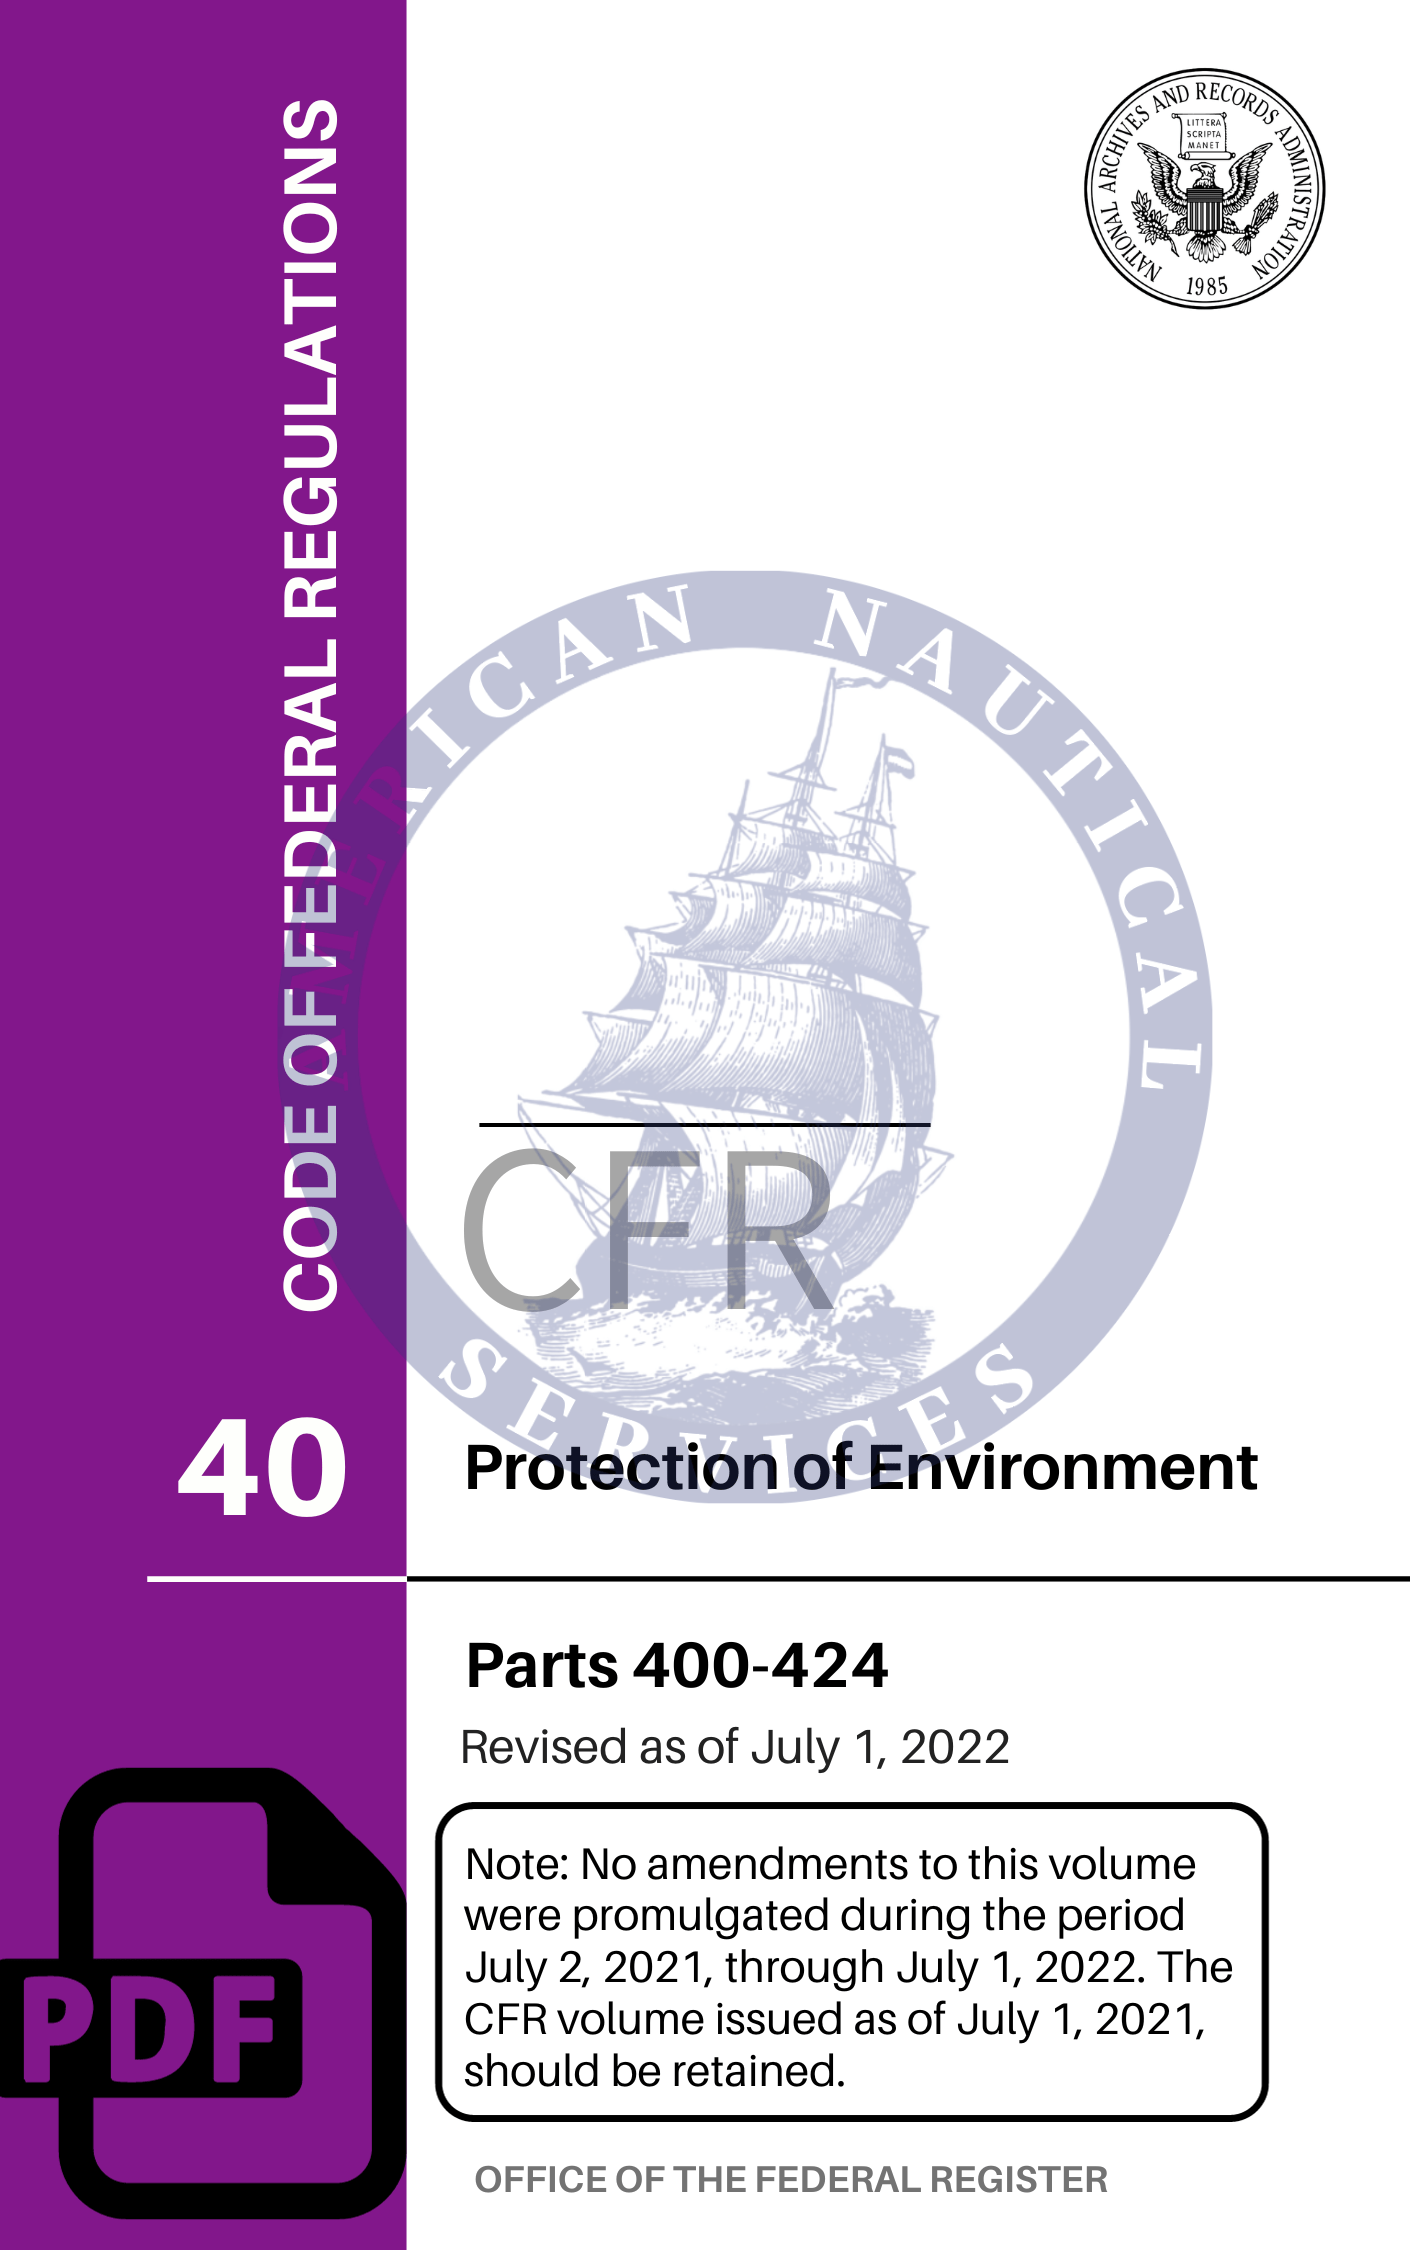 CFR Title 40: Parts 400-424 - Protection of Environment (Code of Federal Regulations), 2022 Edition